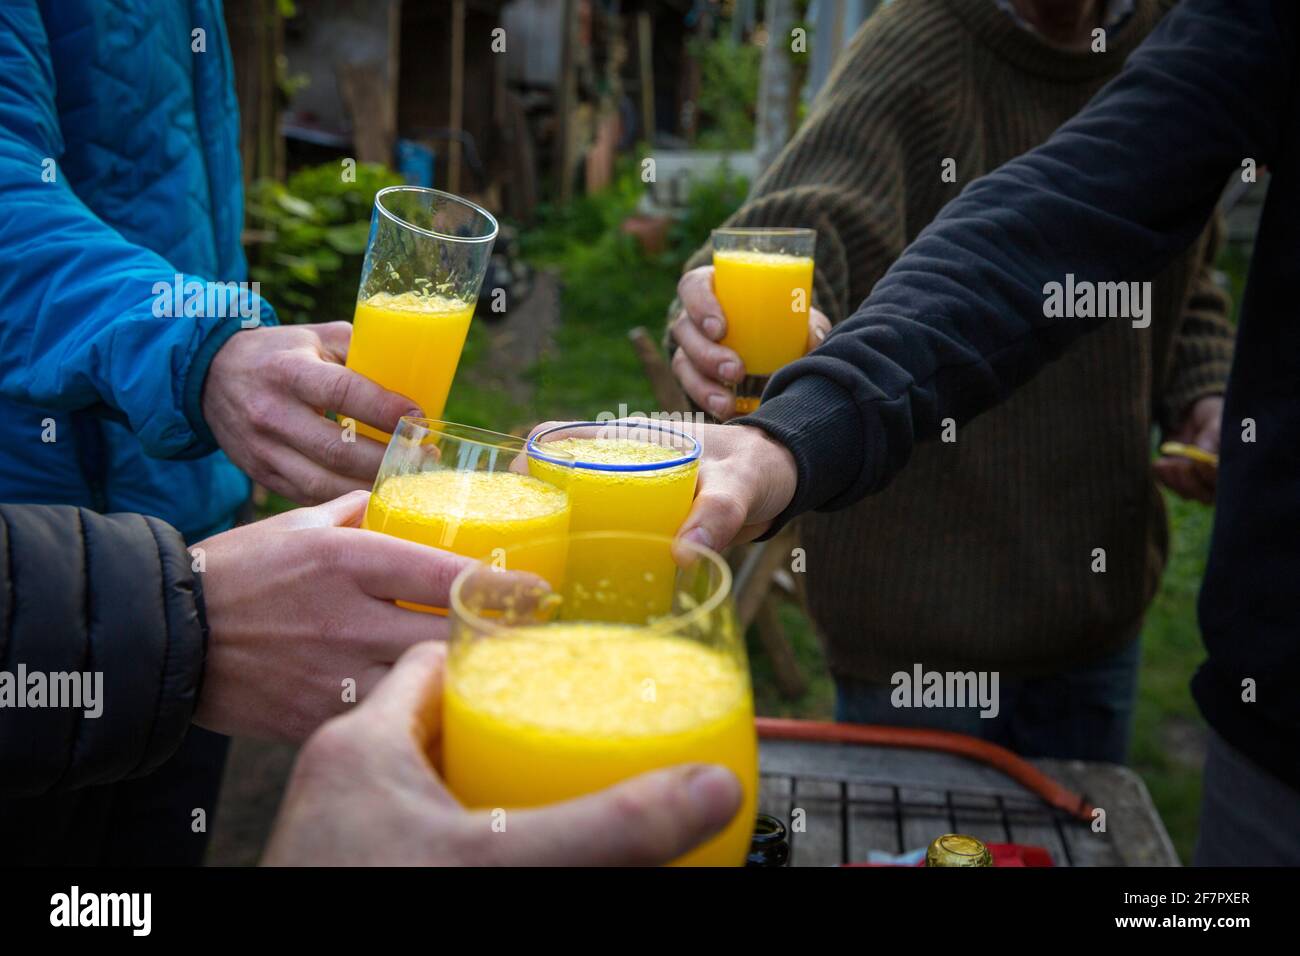 Buck's Fizz - always refreshing at the end of the day. Covid pandemic requires that we stay outside but a drink in the garden is always good! Stock Photo